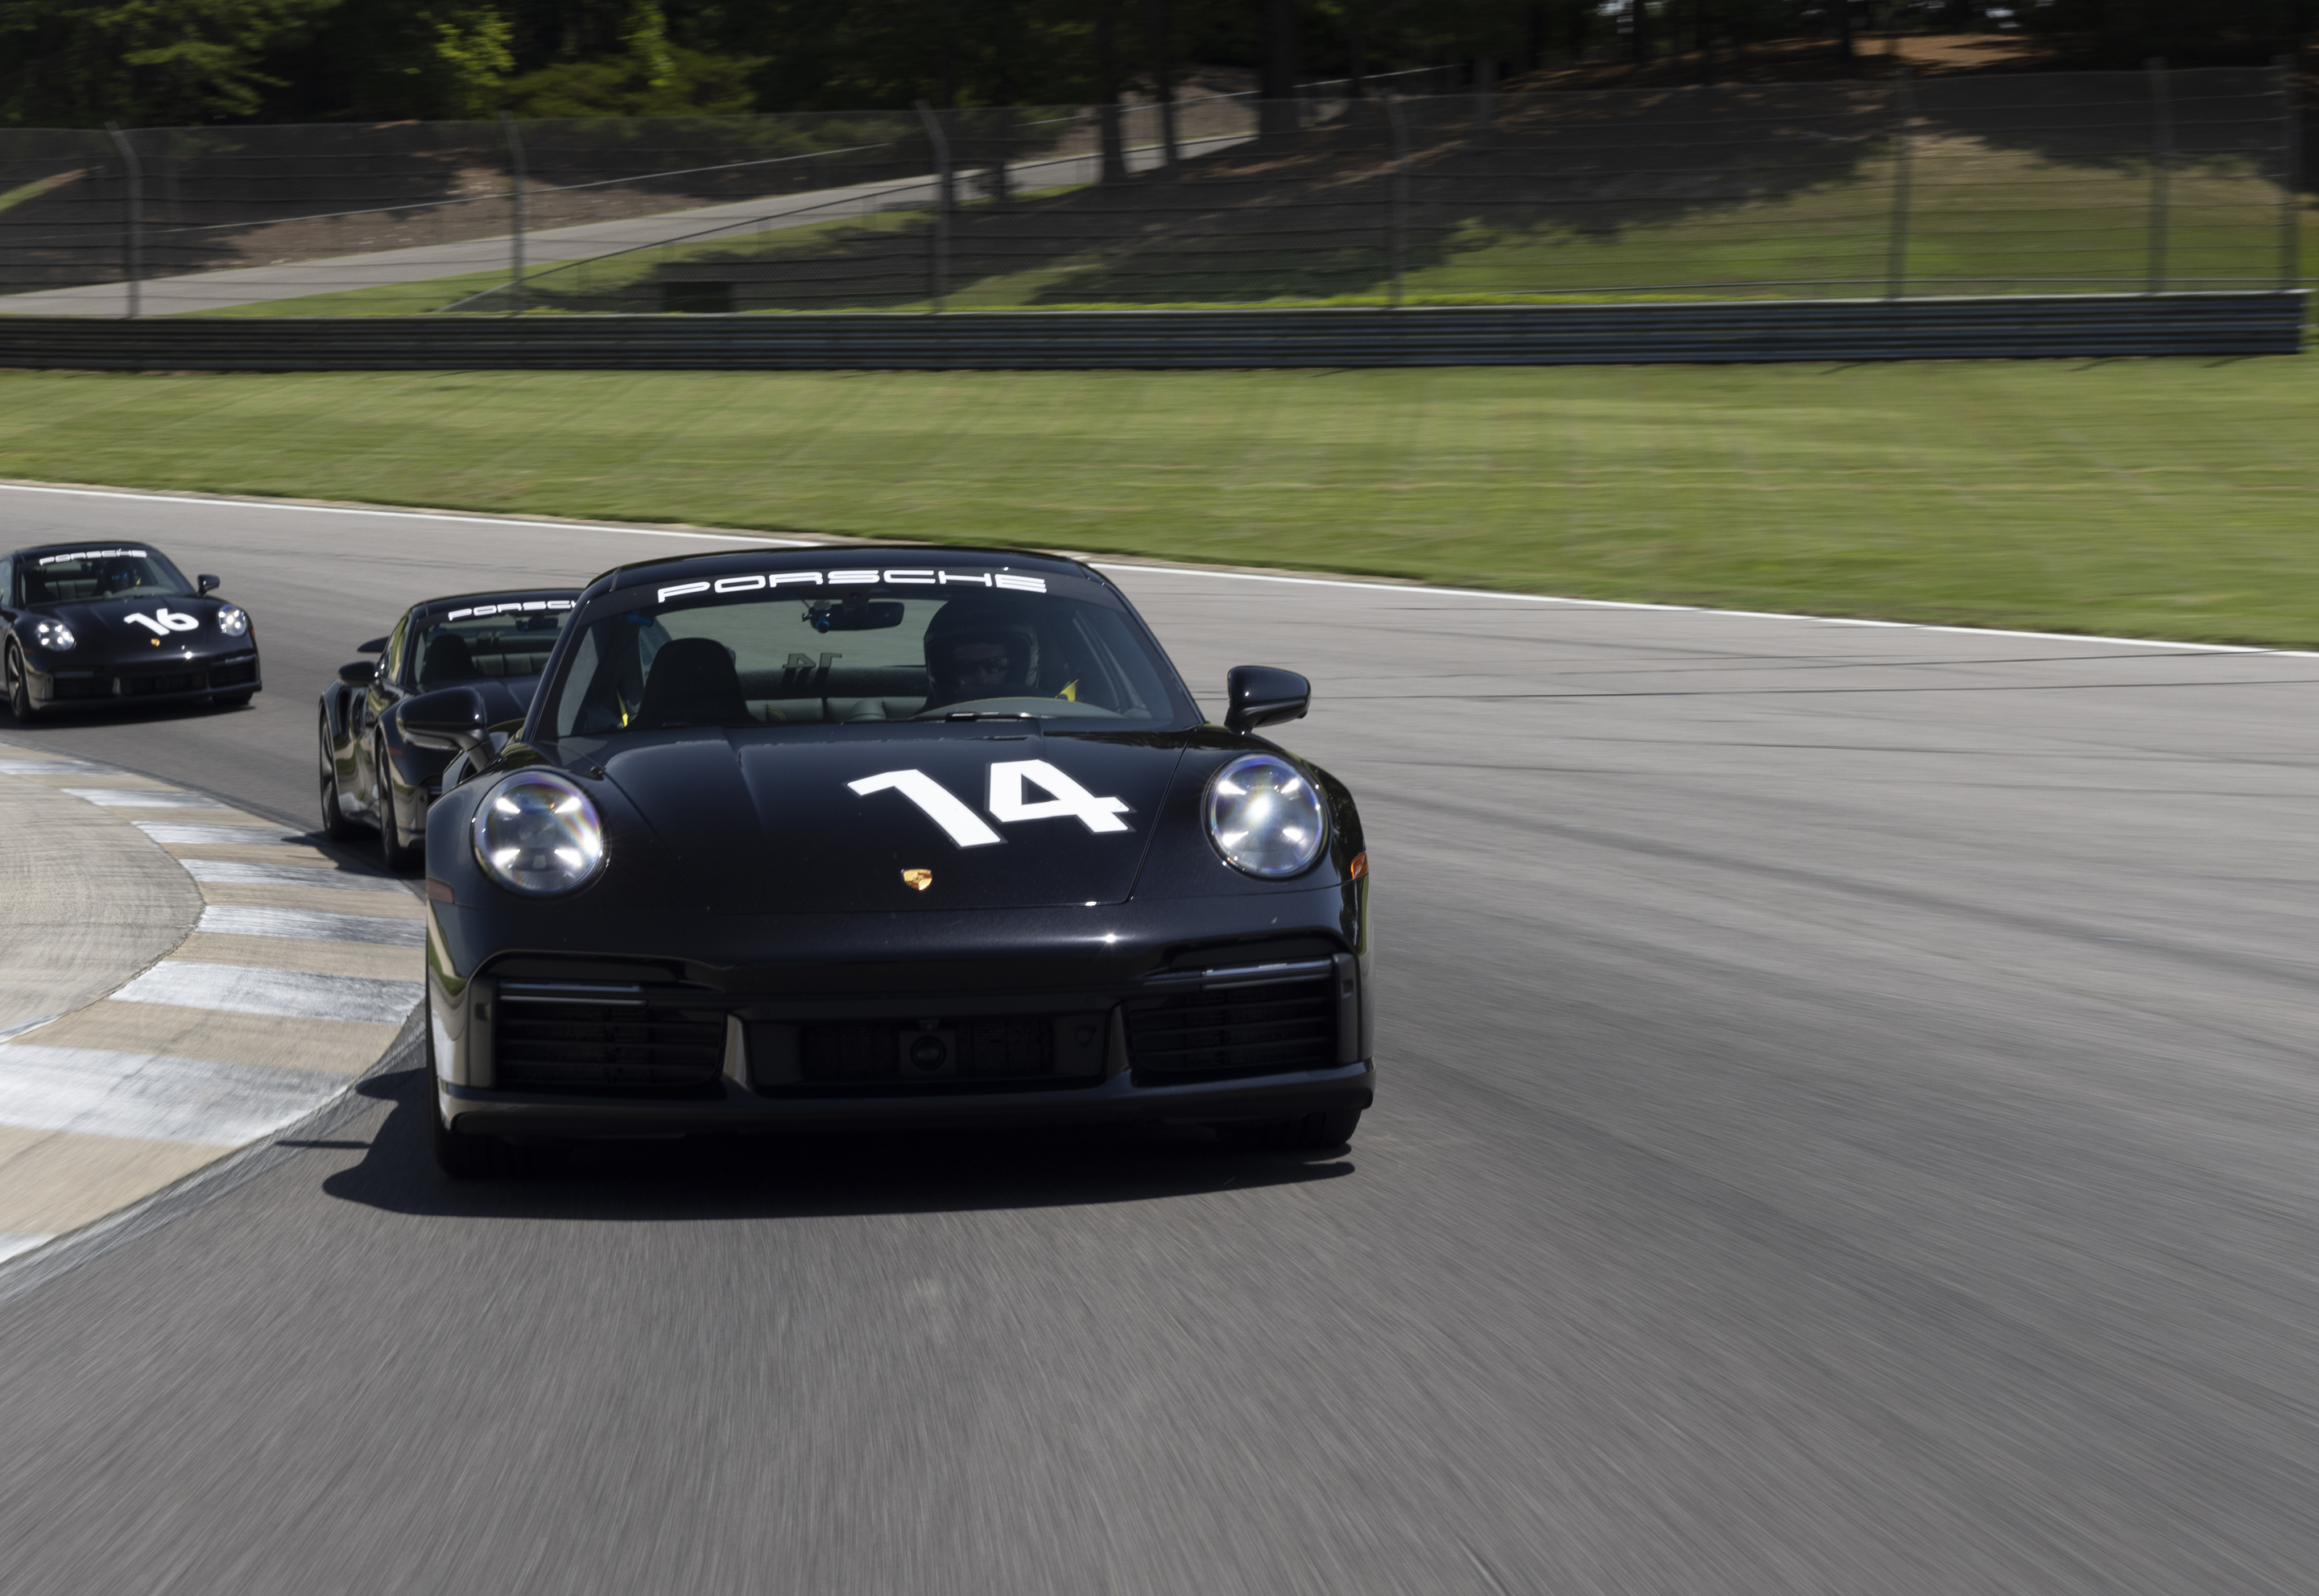 Level one courses, intro background - blue porshe cars on track